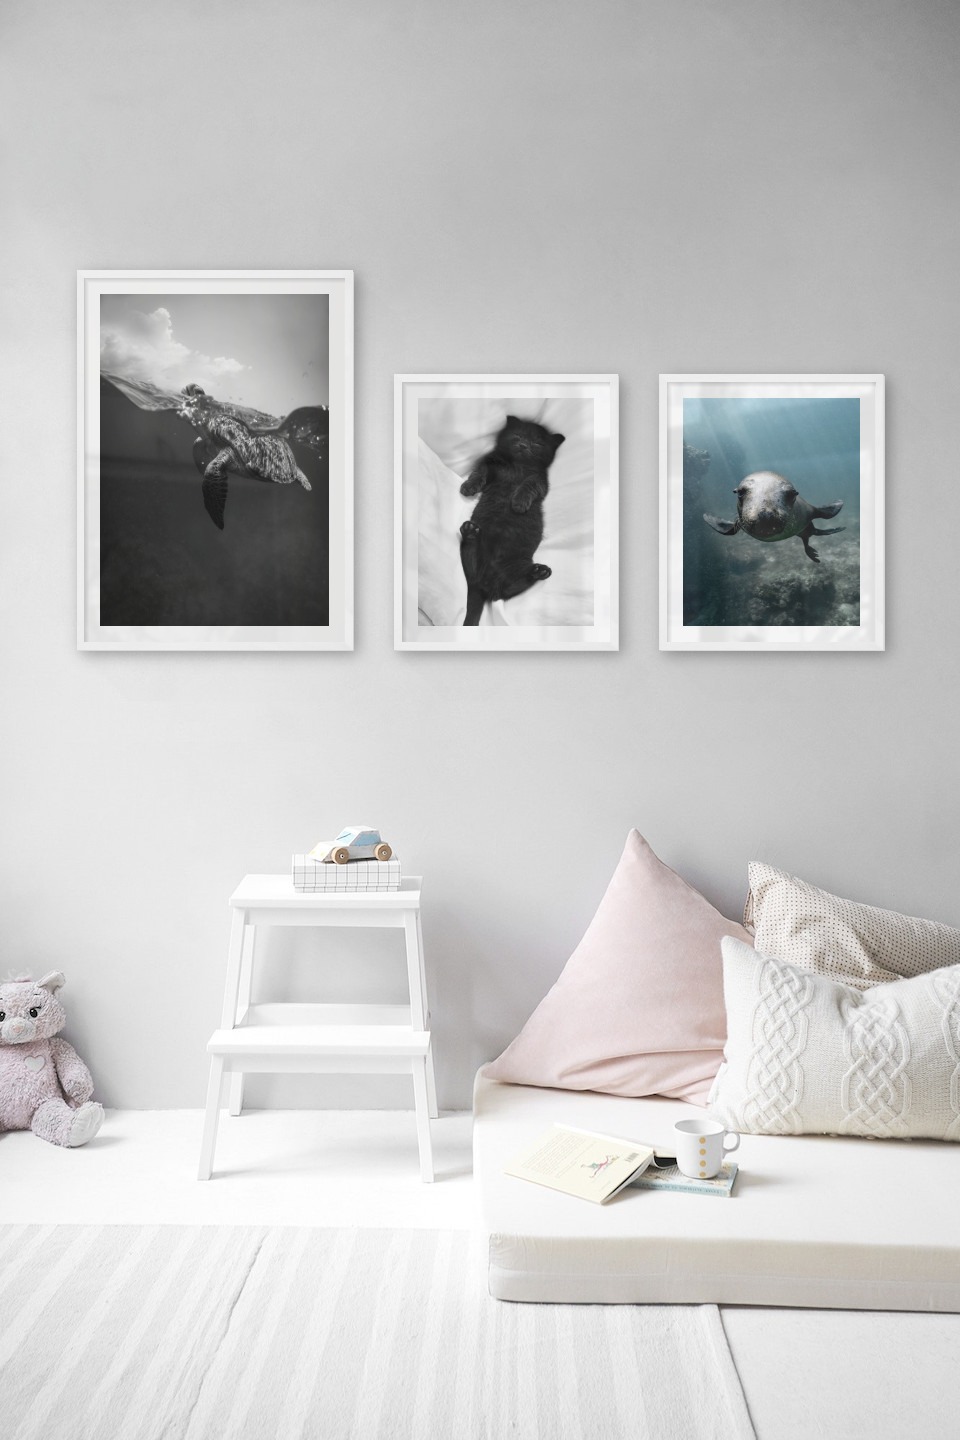 Gallery wall with picture frames in white in sizes 50x70 and 40x50 with prints "Turtle", "Cat in bed" and "Seal in the water"